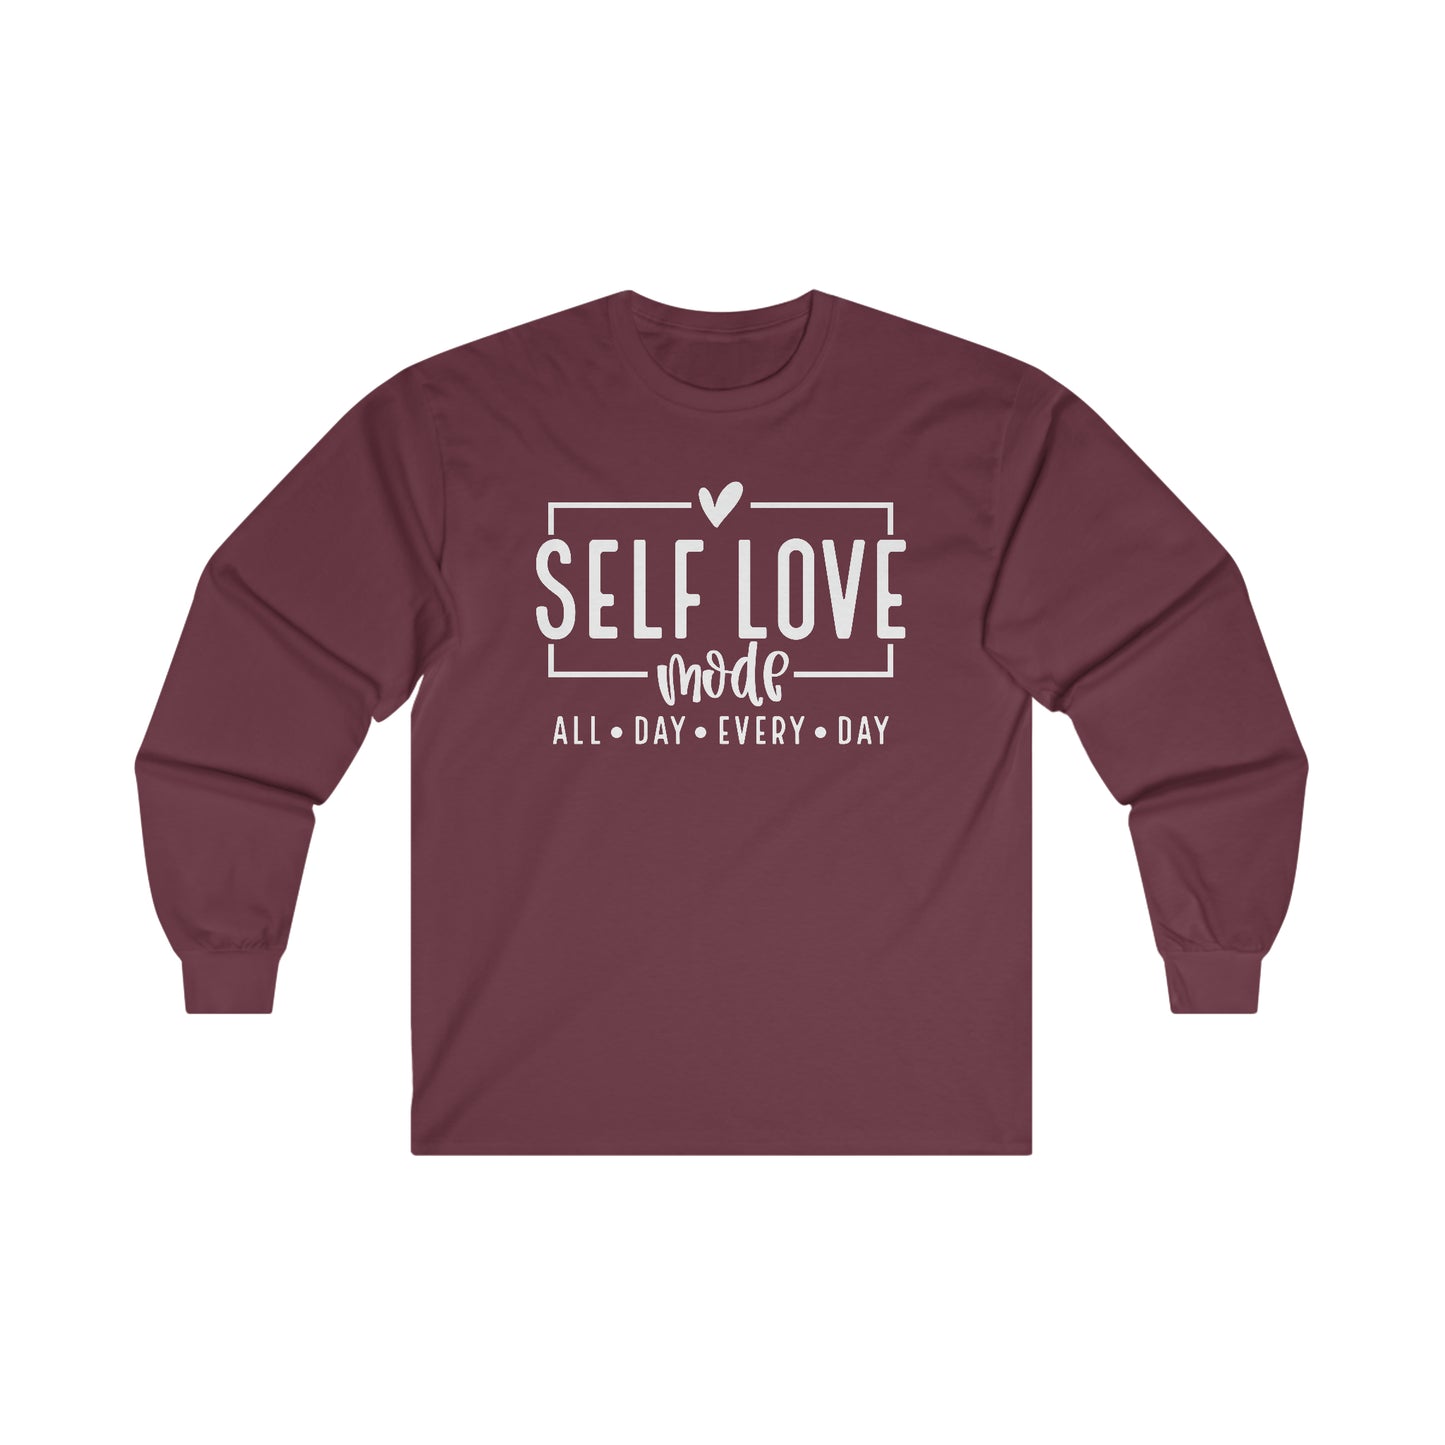 Self Love Mode - All Day Every Day - Heart - Ultra Cotton Long Sleeve Tee